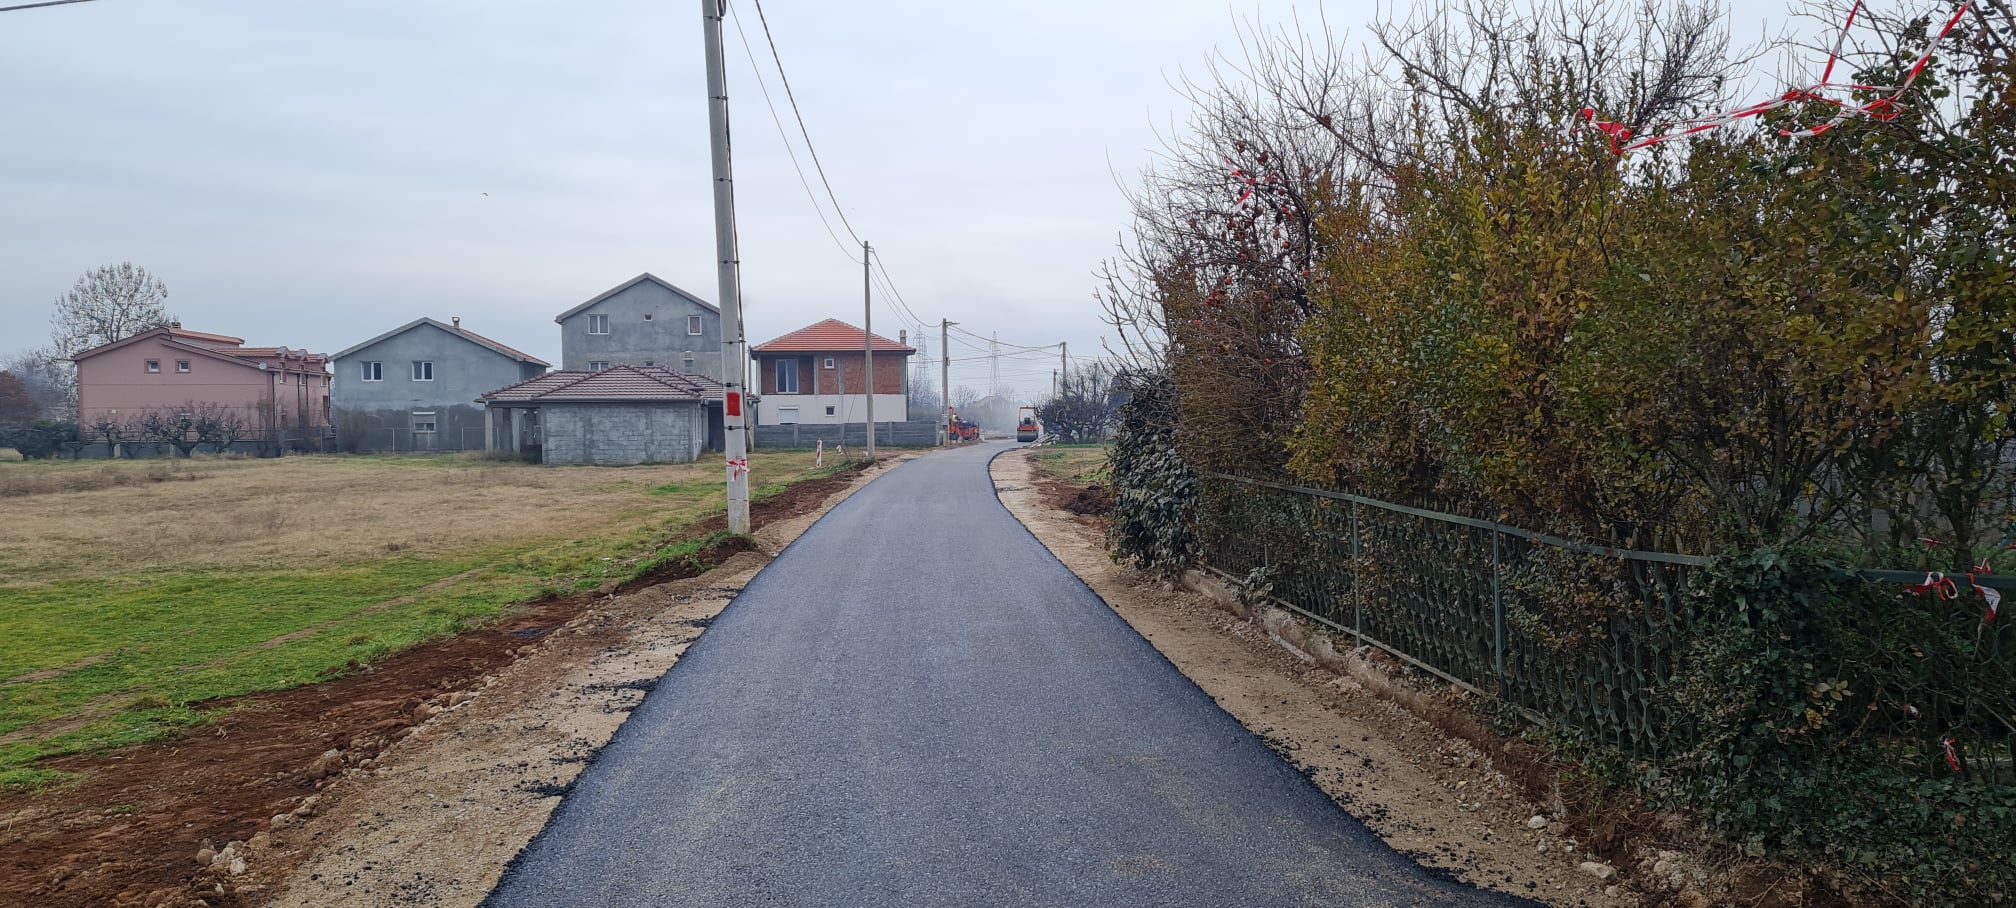 Works on the project of wastewater collection and treatment paused due to precipitation, construction sites are provided, streets passable